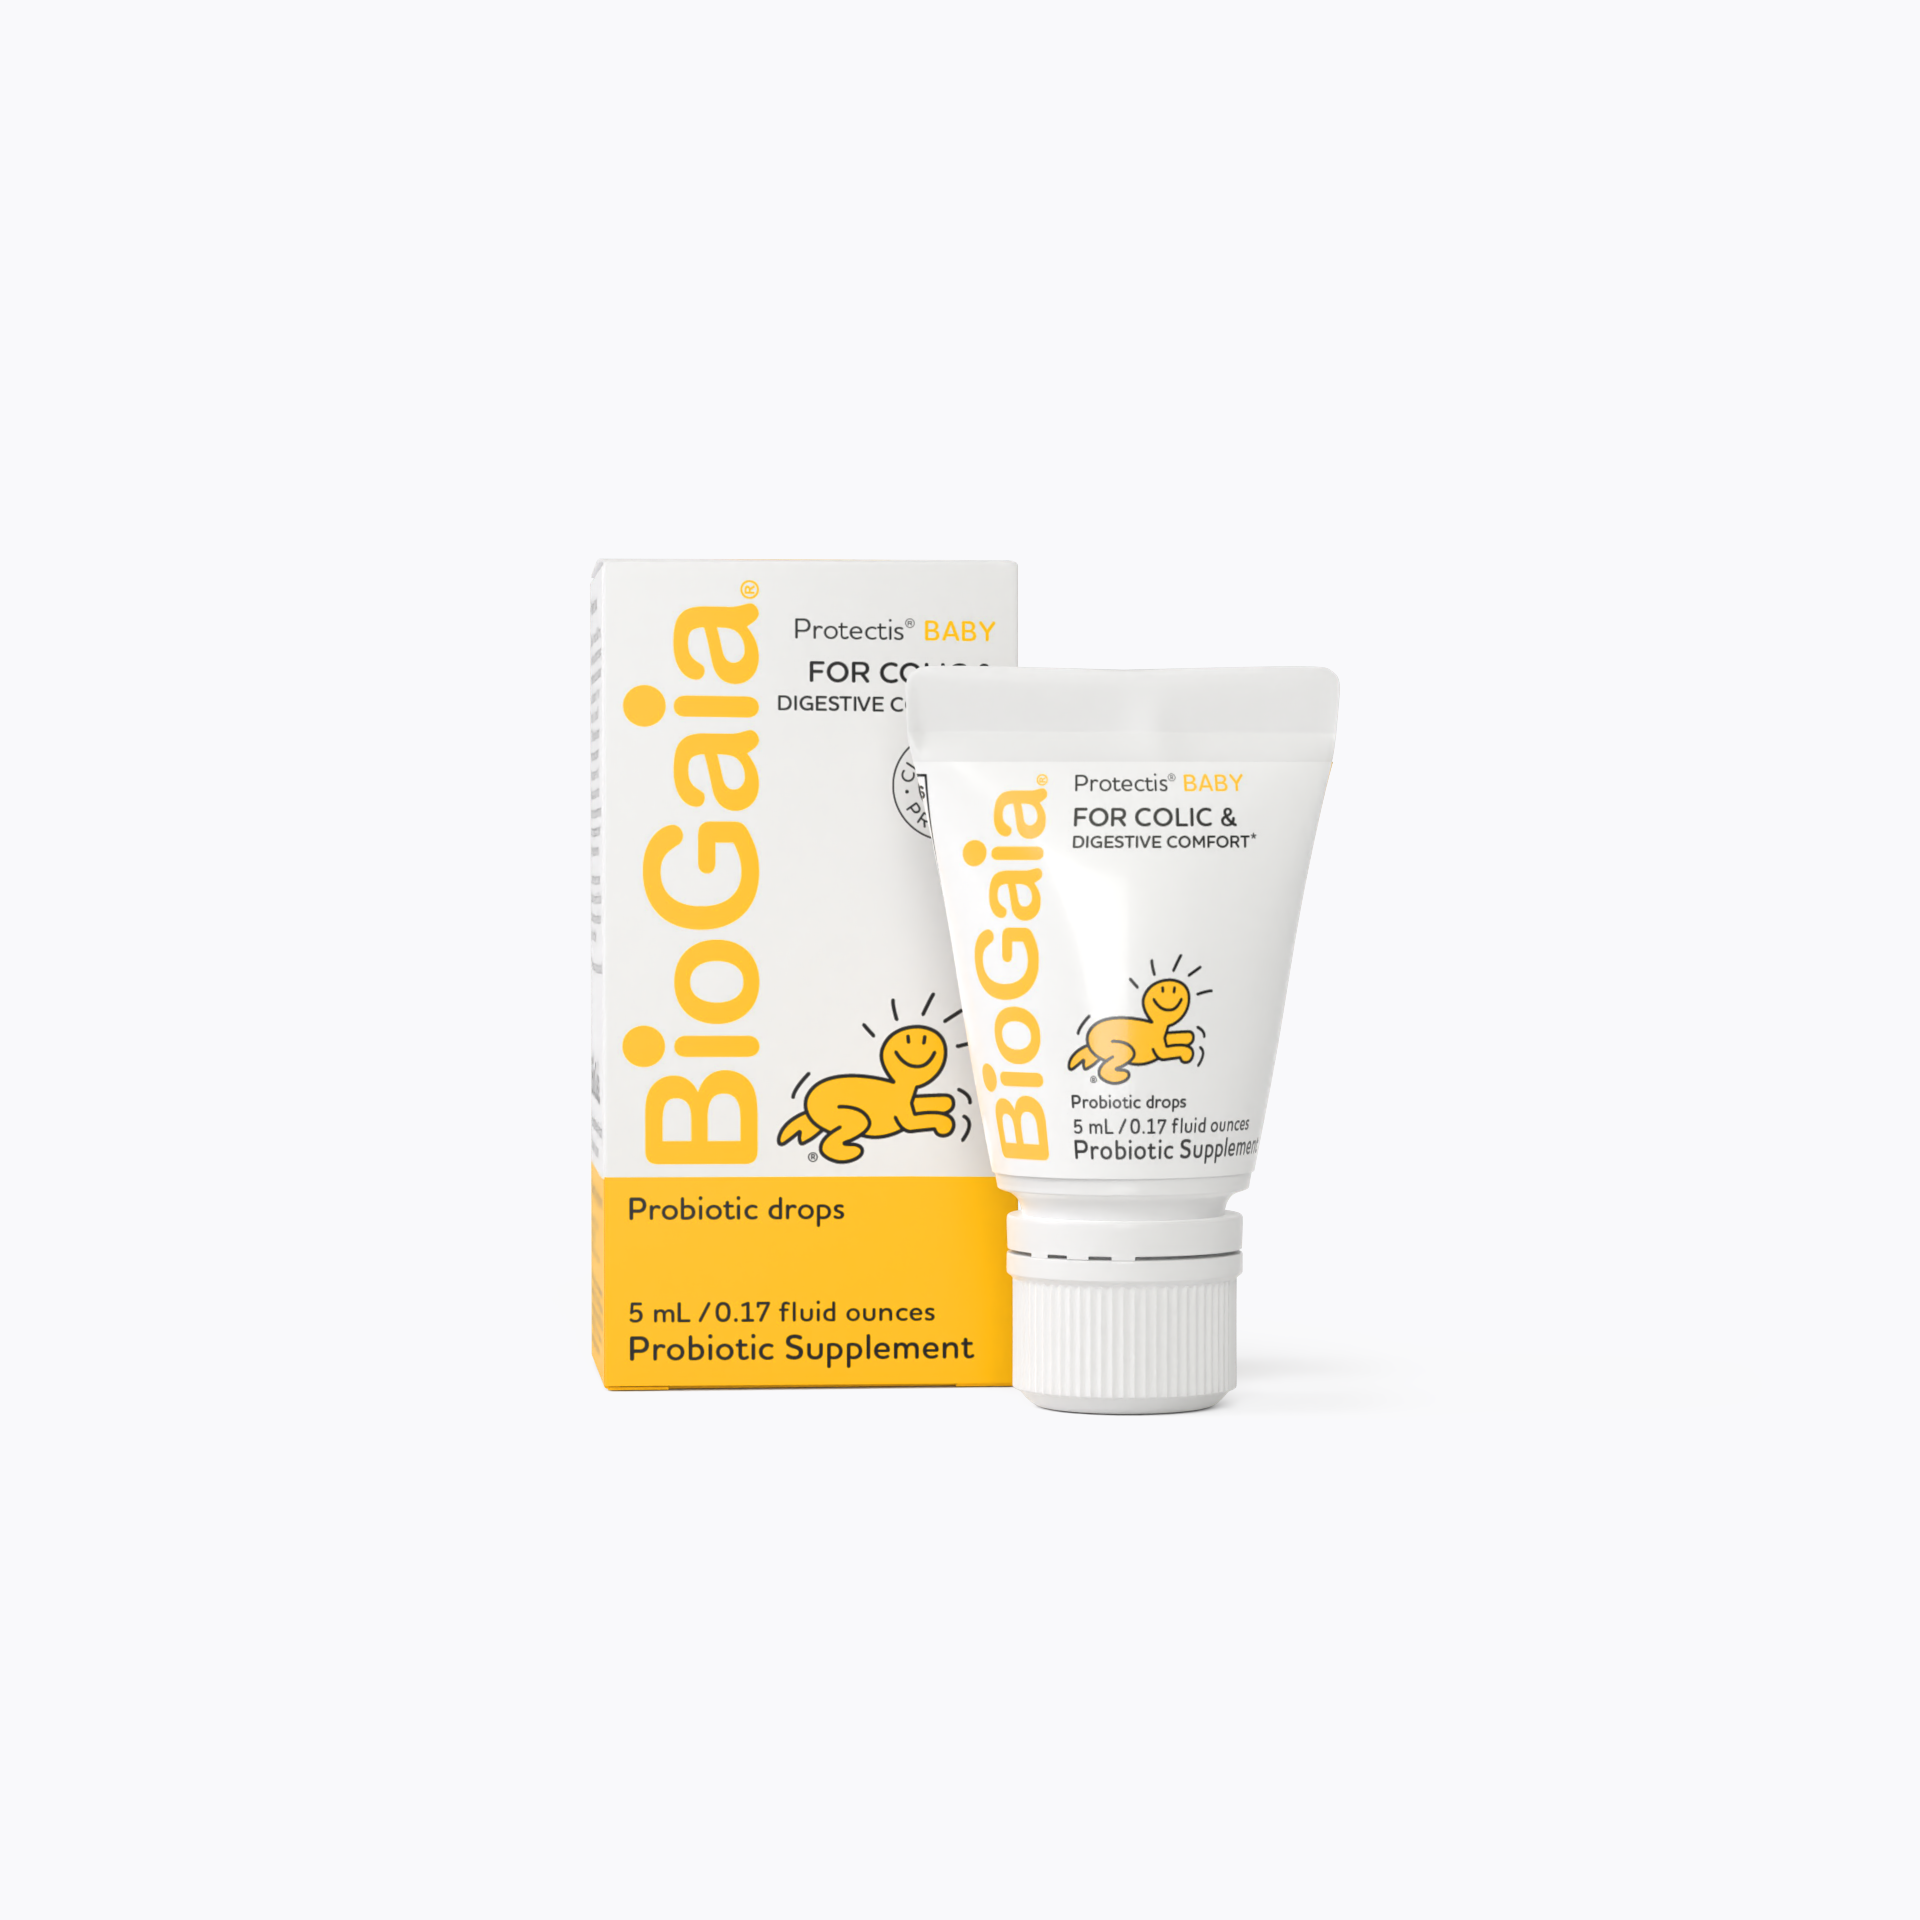 BioGaia Protectis Baby - Probiotic for colic and digestive comfort